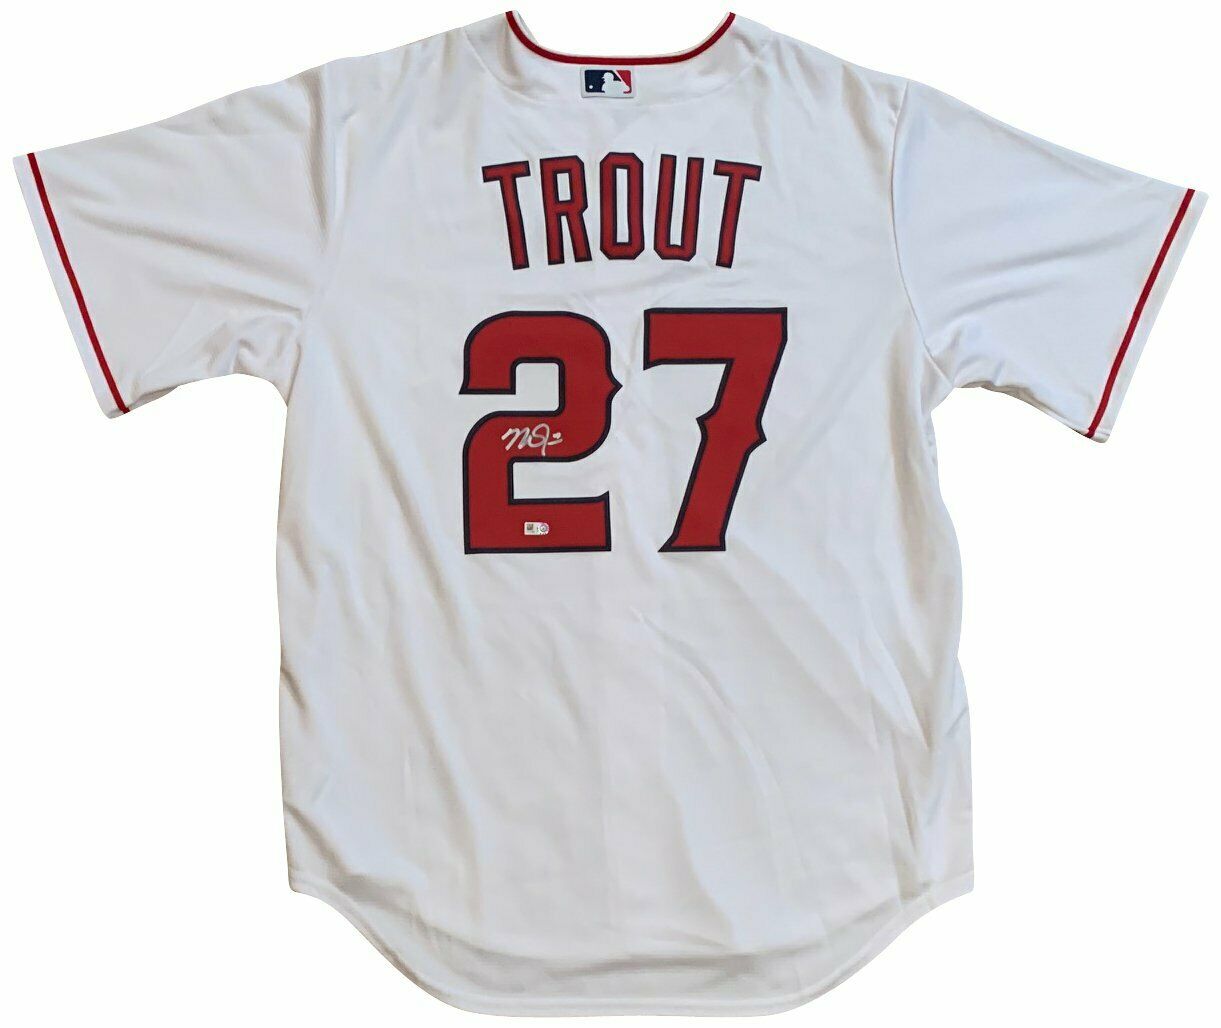 Mike Trout Autographed 2015 All-Star Game Jersey